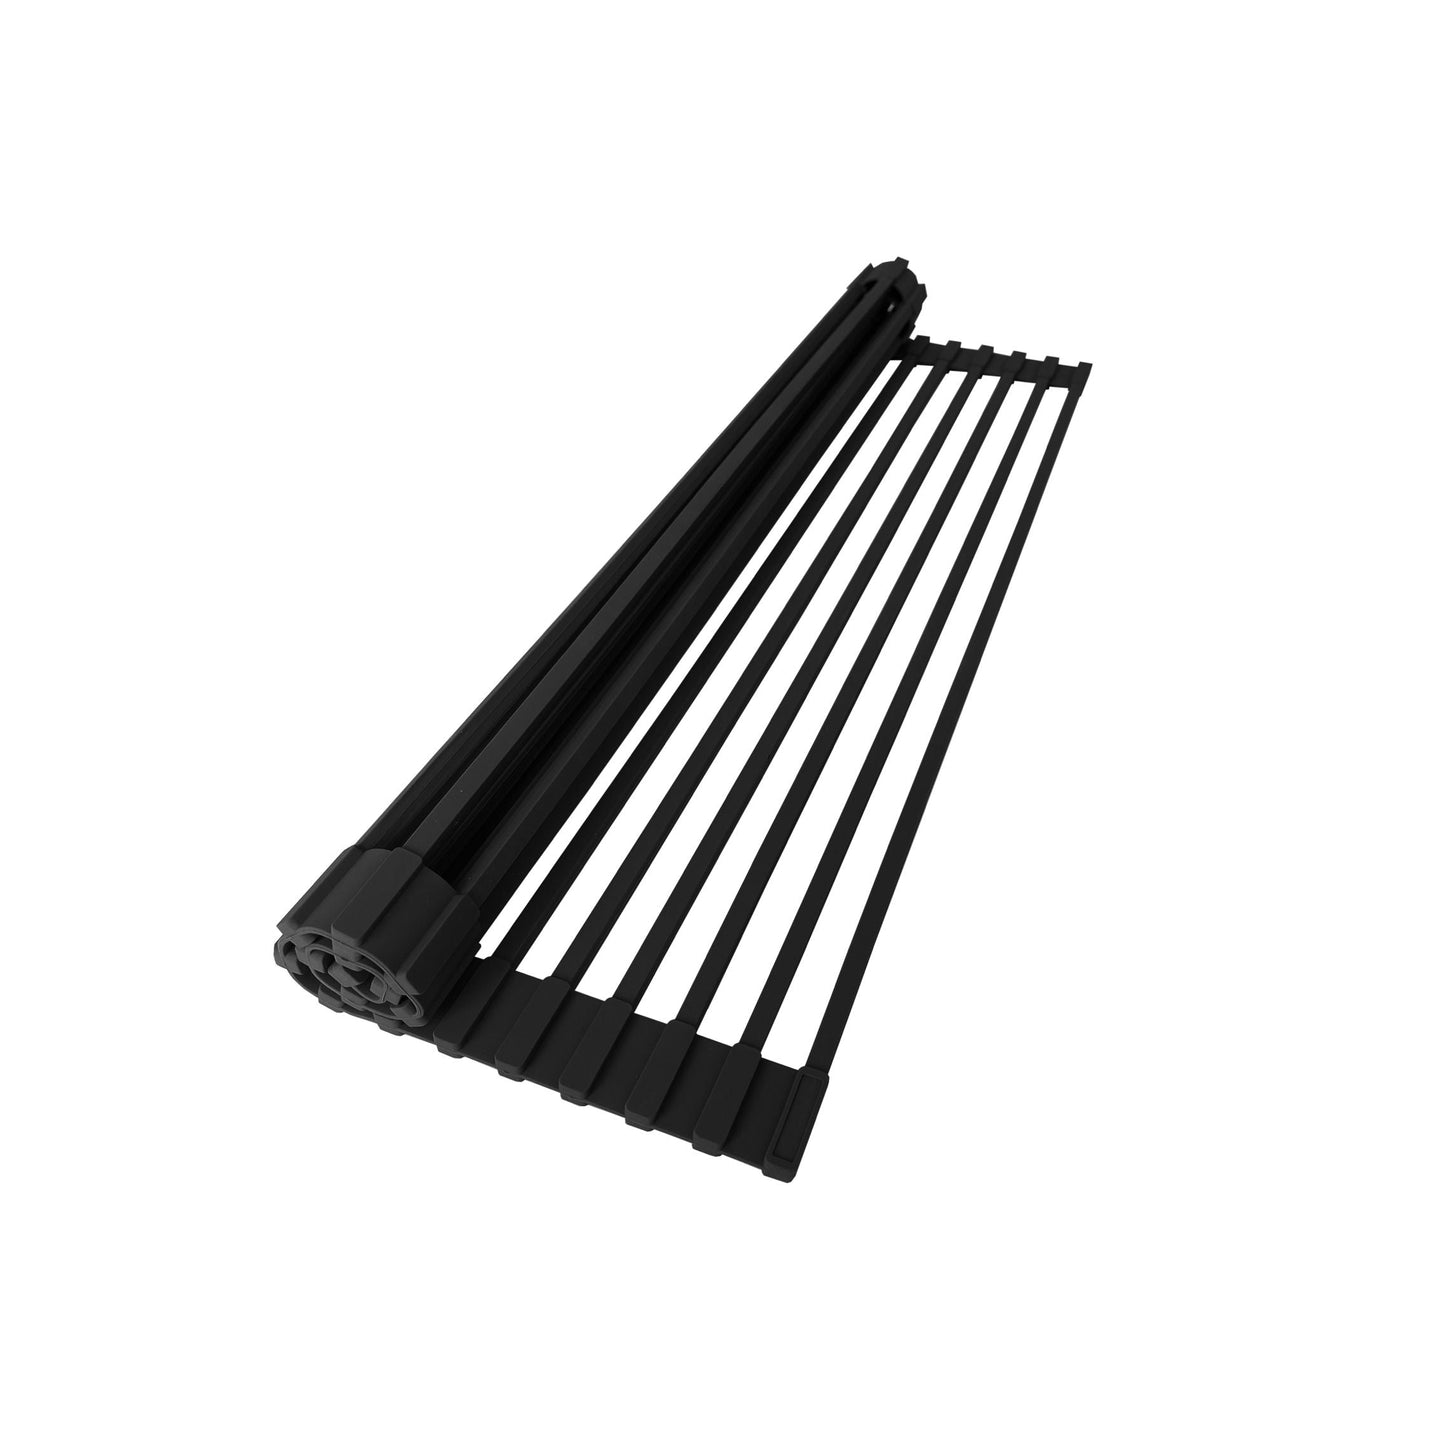 Stylish 20" Over the Sink Roll-up Drying Rack Black A-900BK